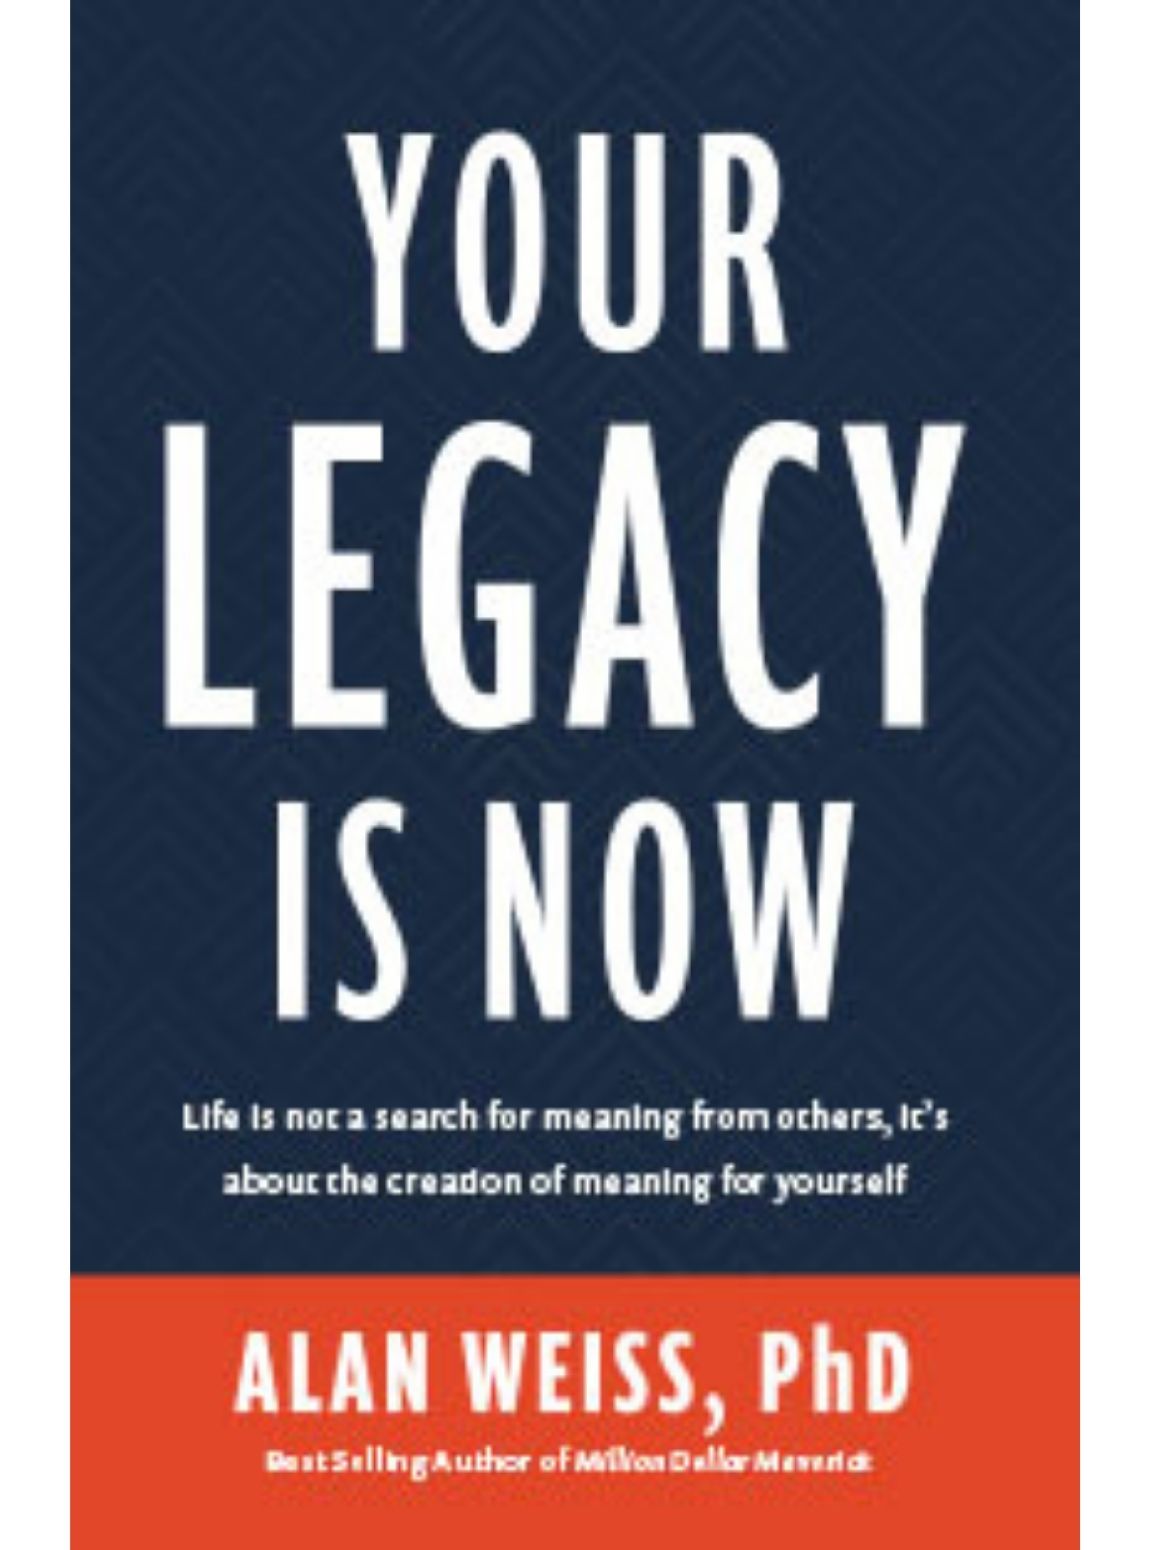 Your Legacy is Now by Alan Weiss, PhD